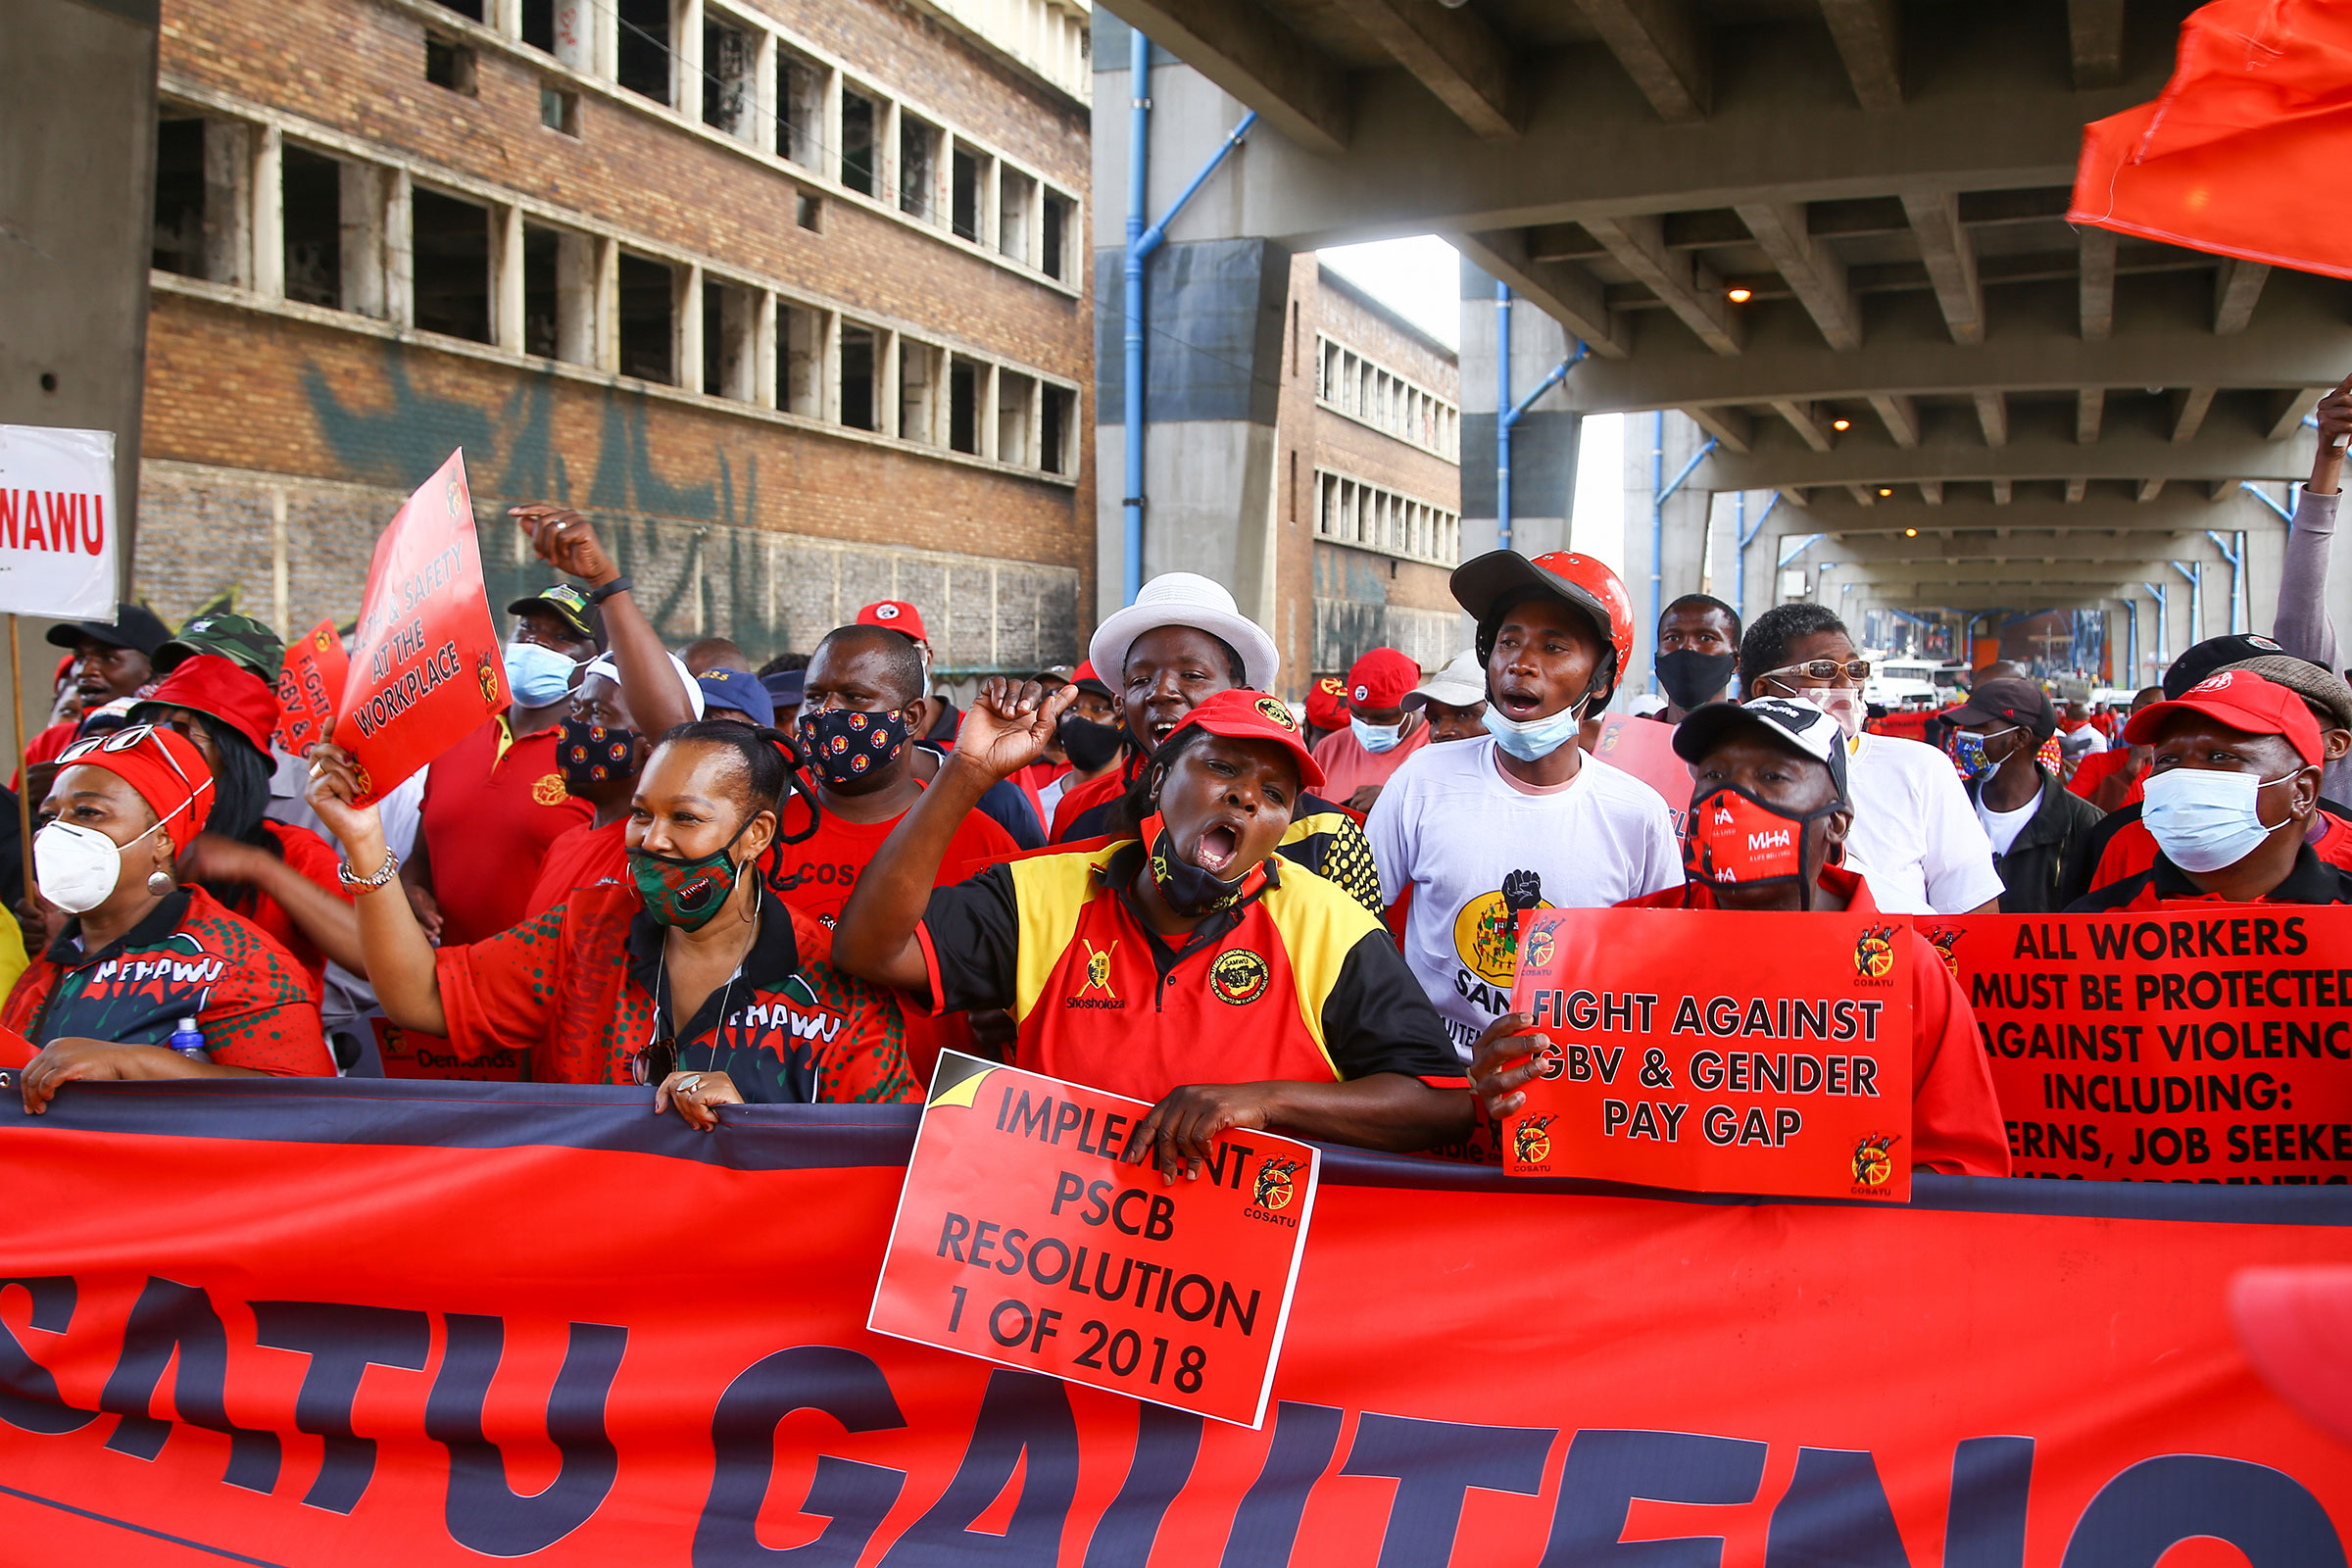 COSATU National Day of Action in Johannesburg in South Africa